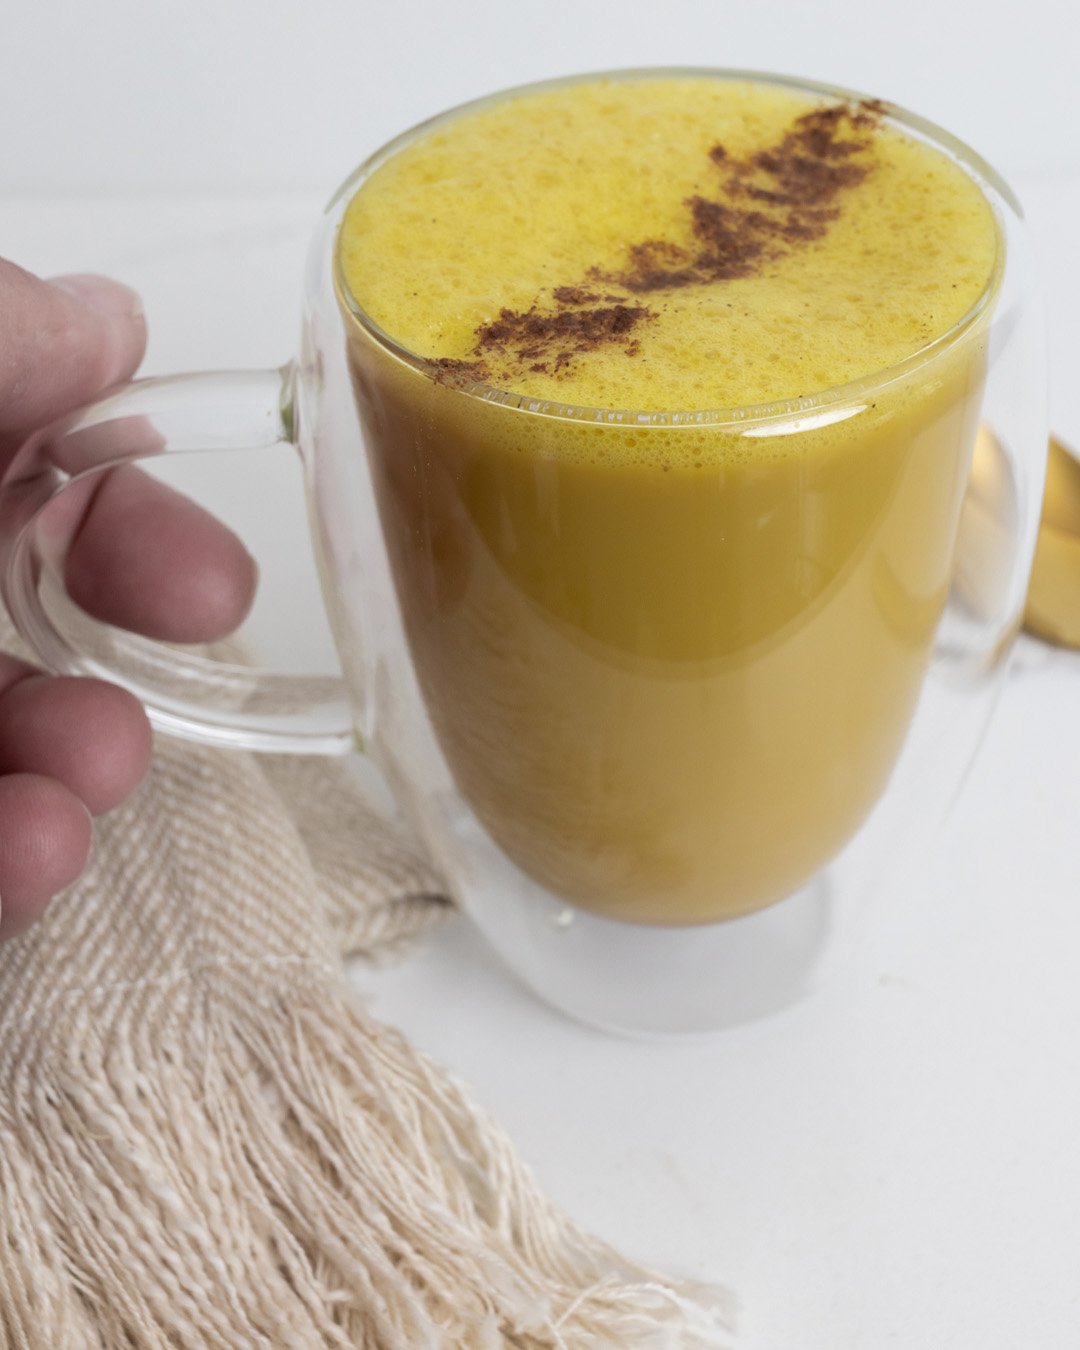 This homemade turmeric latte has been my go-to lately when I want a healthy treat in the afternoon or in the evening after dinner. It's full of good-for-you ingredients, but just feels so fancy and indulgent at the same time!